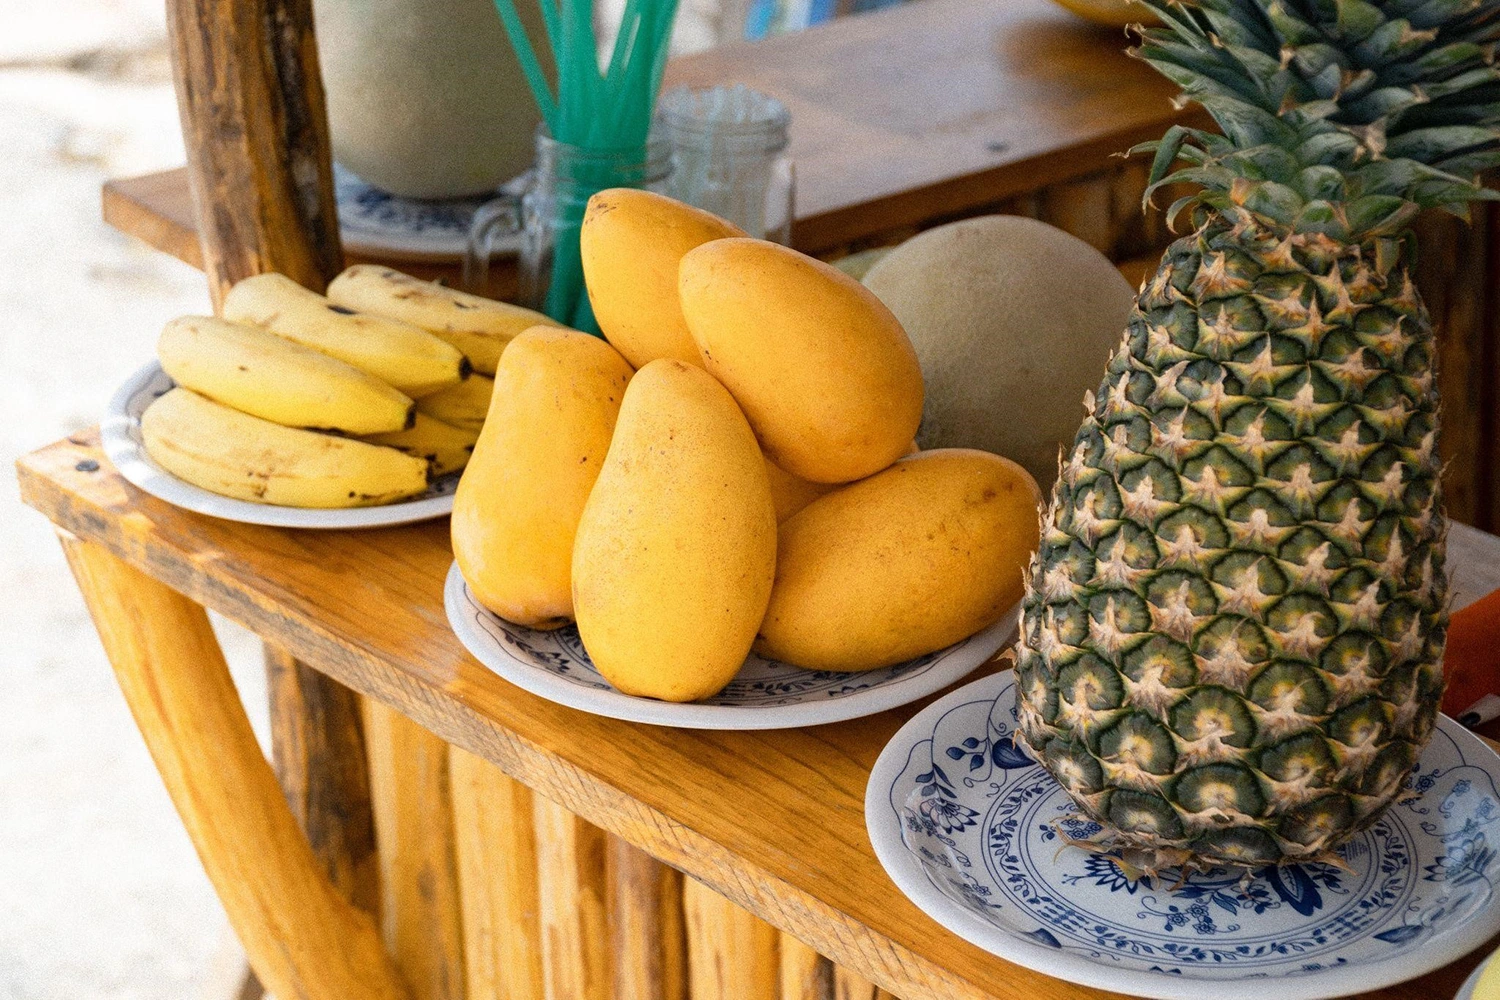 Culinary creativity on display with bananas, pineapples, and mangoes on a wooden table.